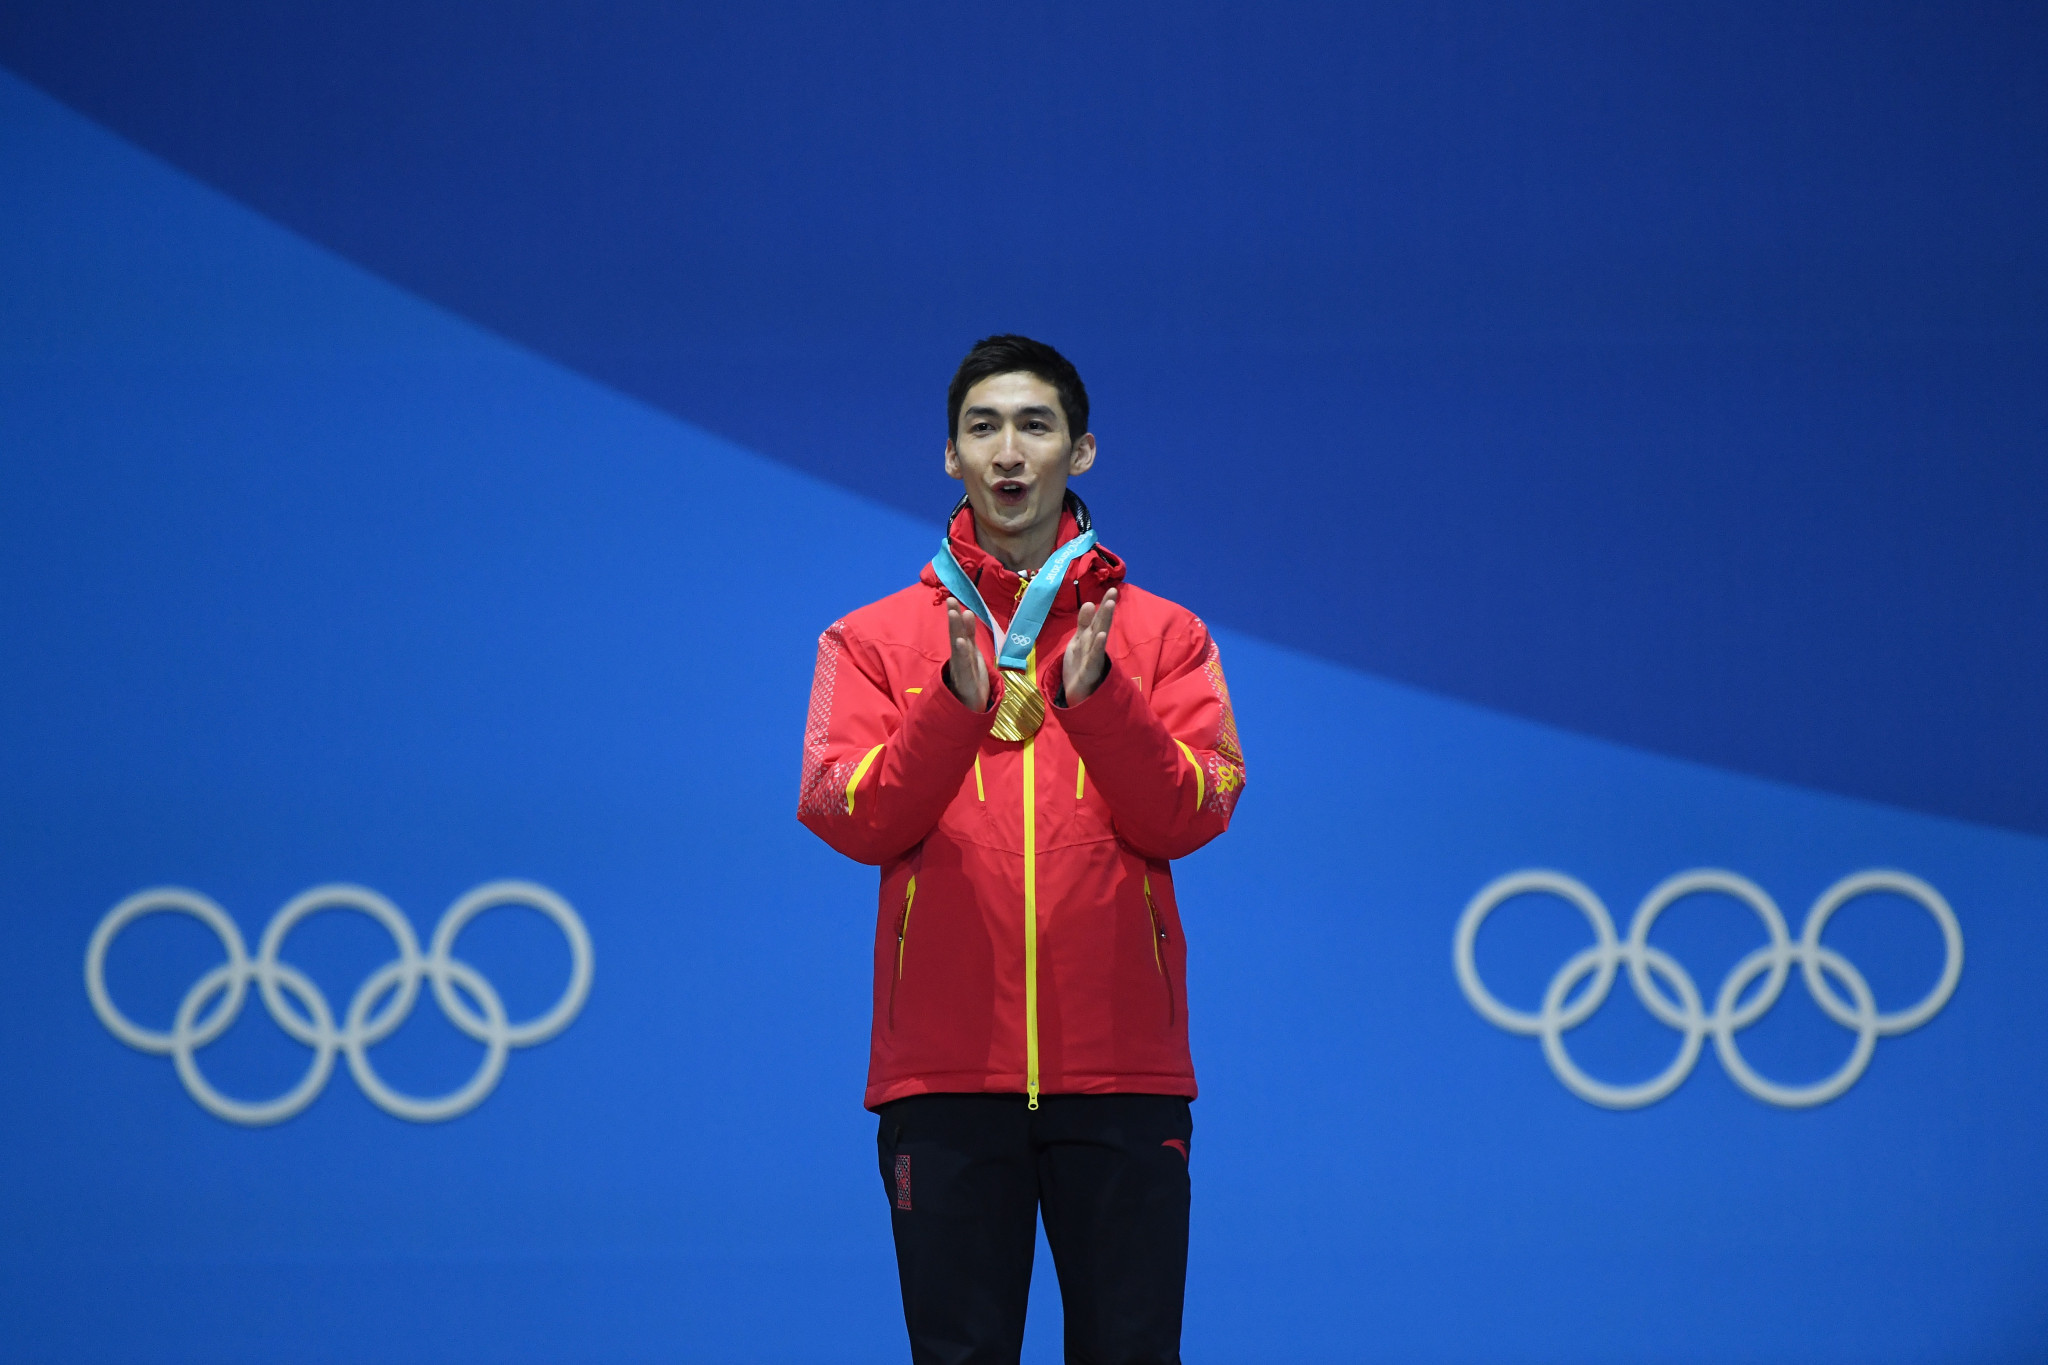 Wu Dajing collected China's only gold medal at the 2018 Winter Olympic Games in Pyeongchang ©Getty Images